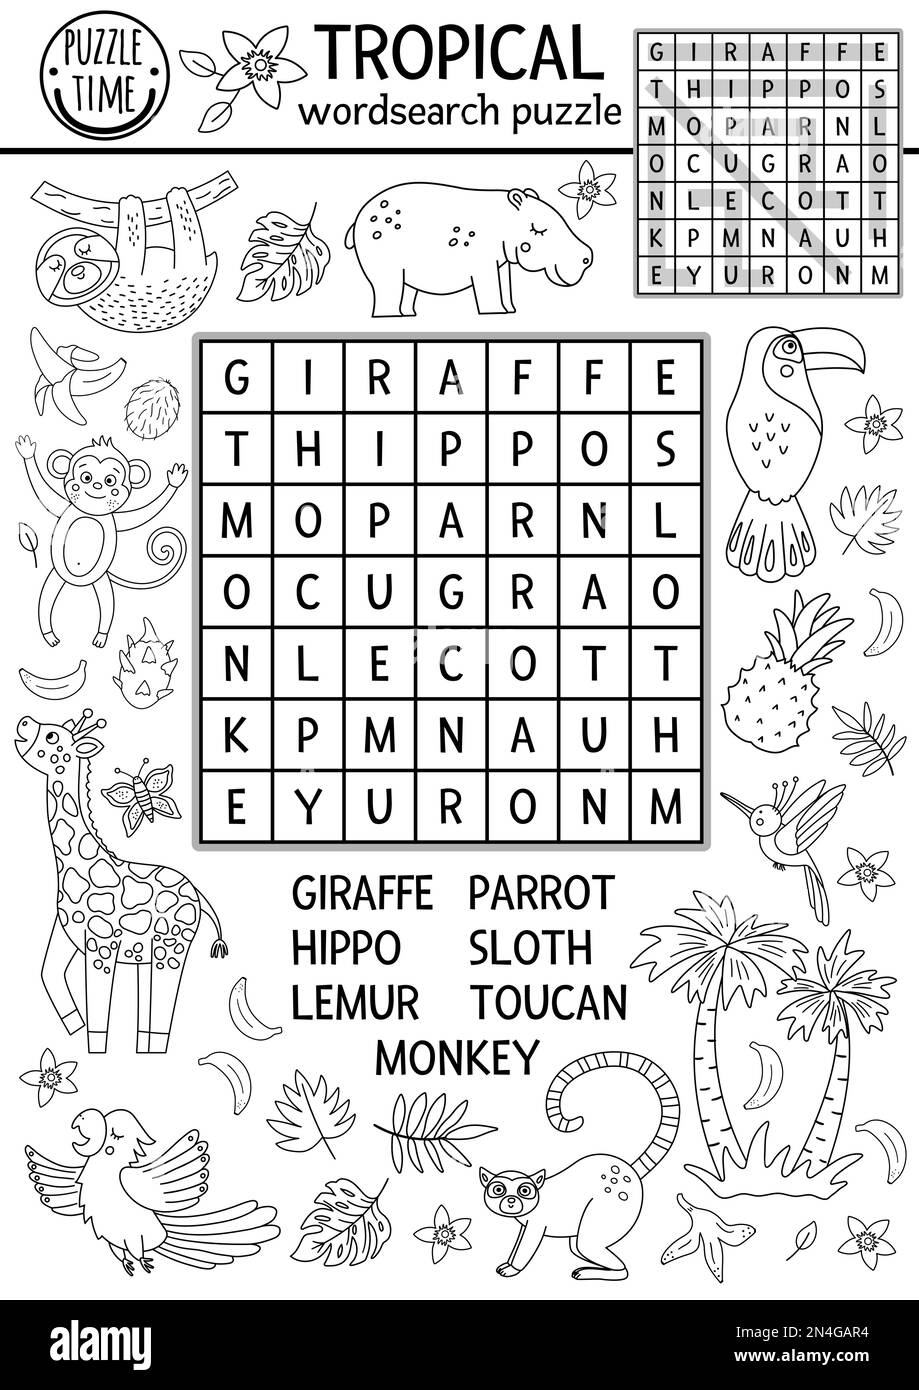 Vector black and white tropical wordsearch puzzle for kids. Simple summer crossword with exotic animals and birds for children. Keyword activity with Stock Vector